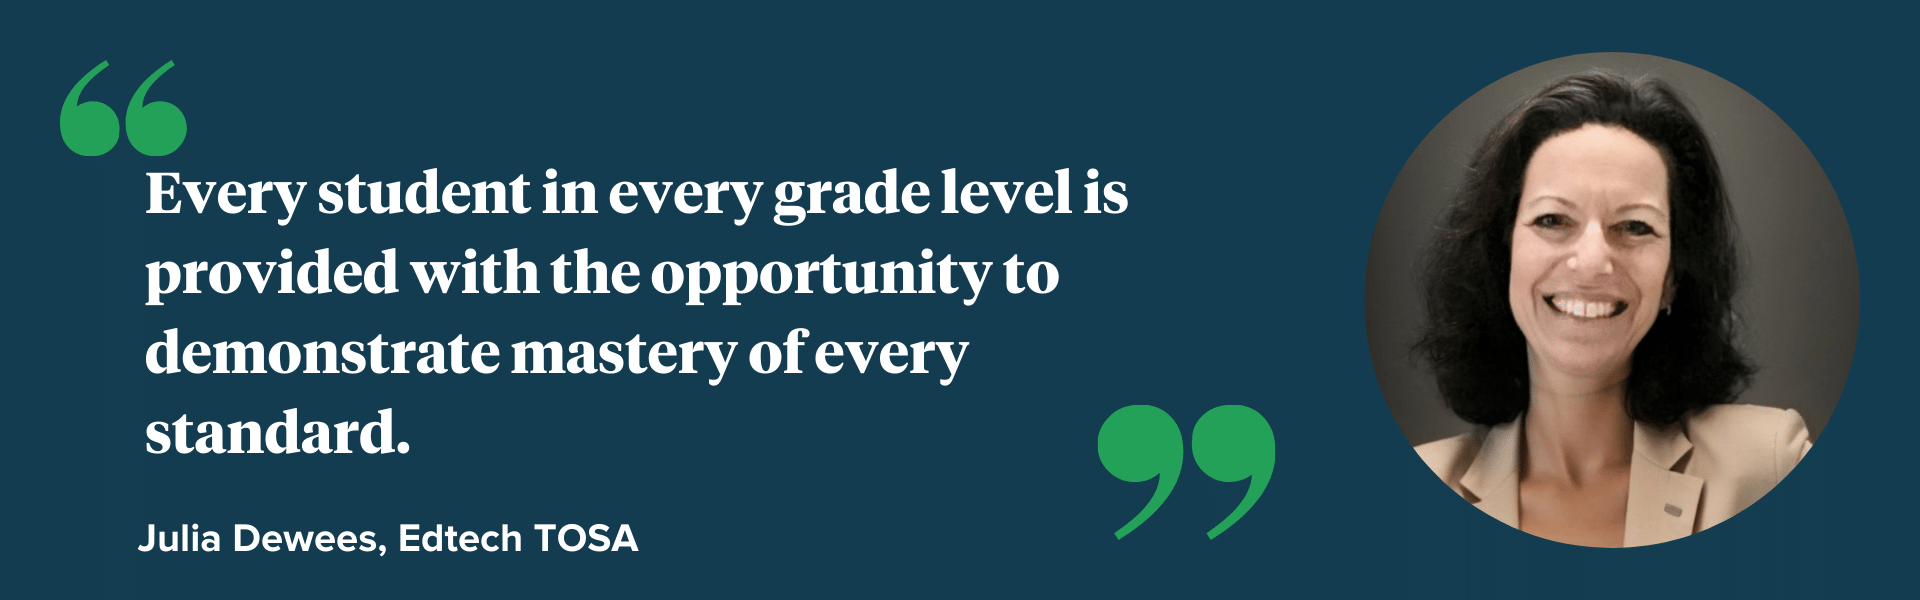 every student in every grade level is provided with the opportunity to demonstrate mastery of every standard